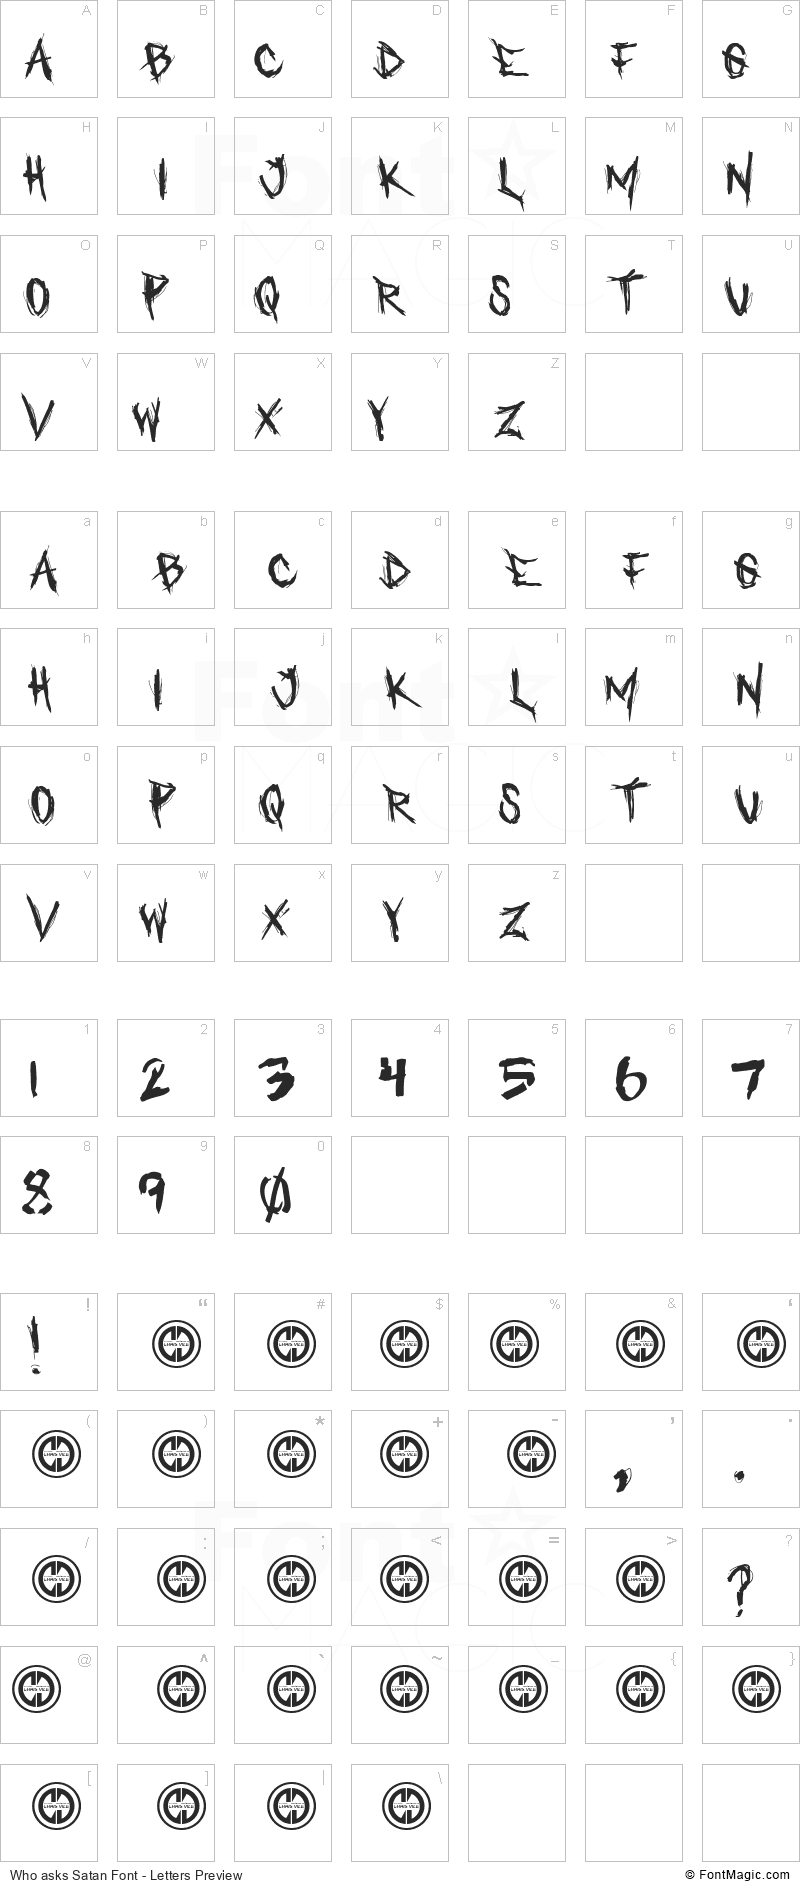 Who asks Satan Font - All Latters Preview Chart